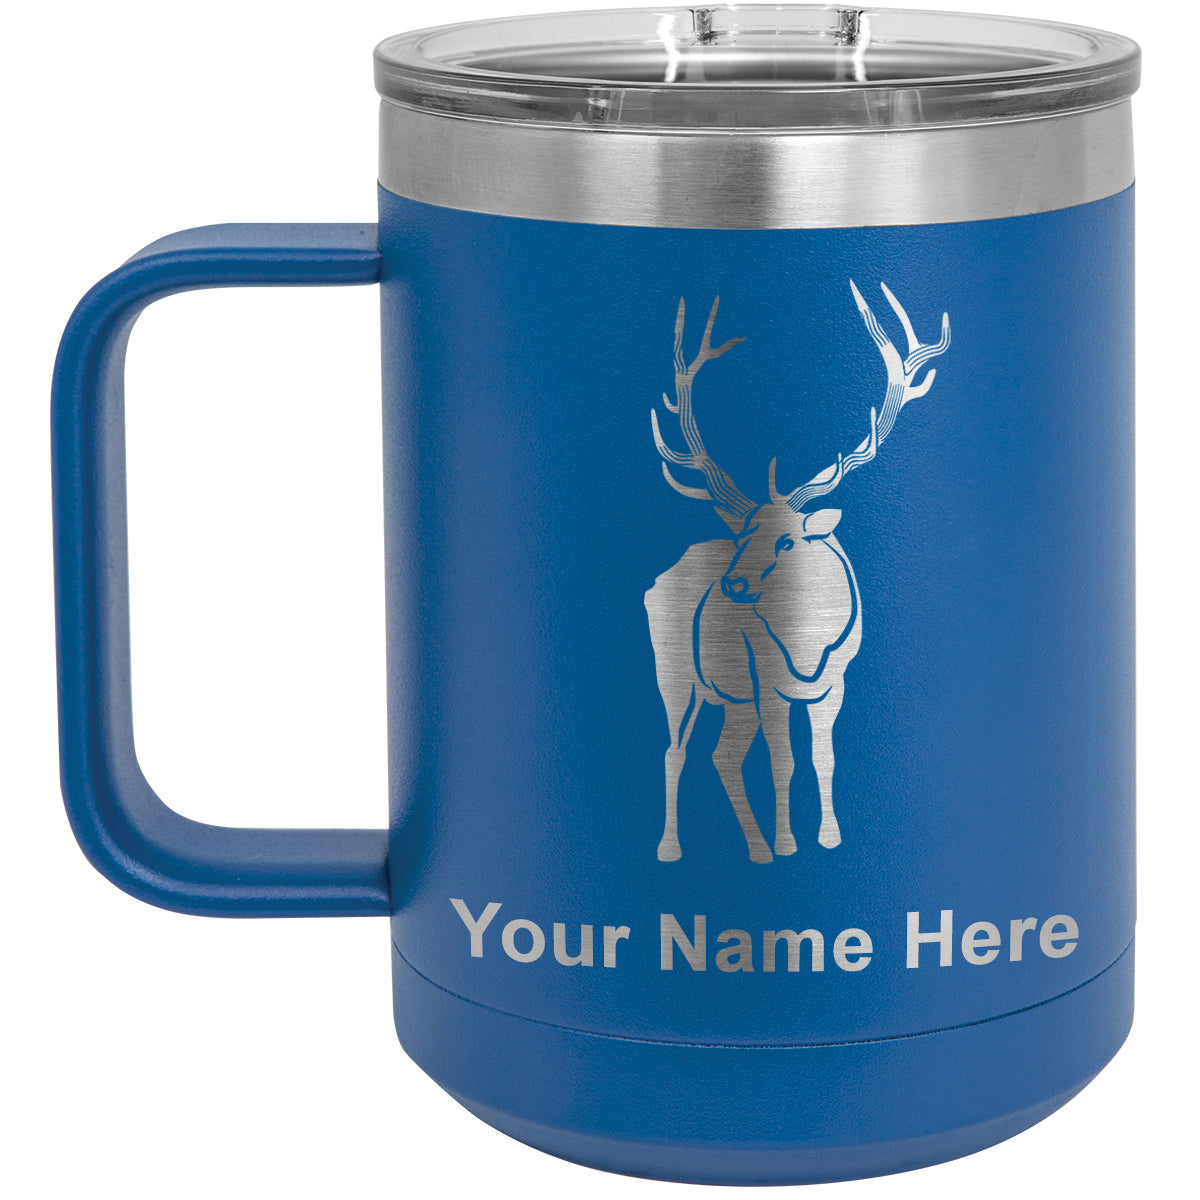 15oz Vacuum Insulated Coffee Mug, Elk, Personalized Engraving Included